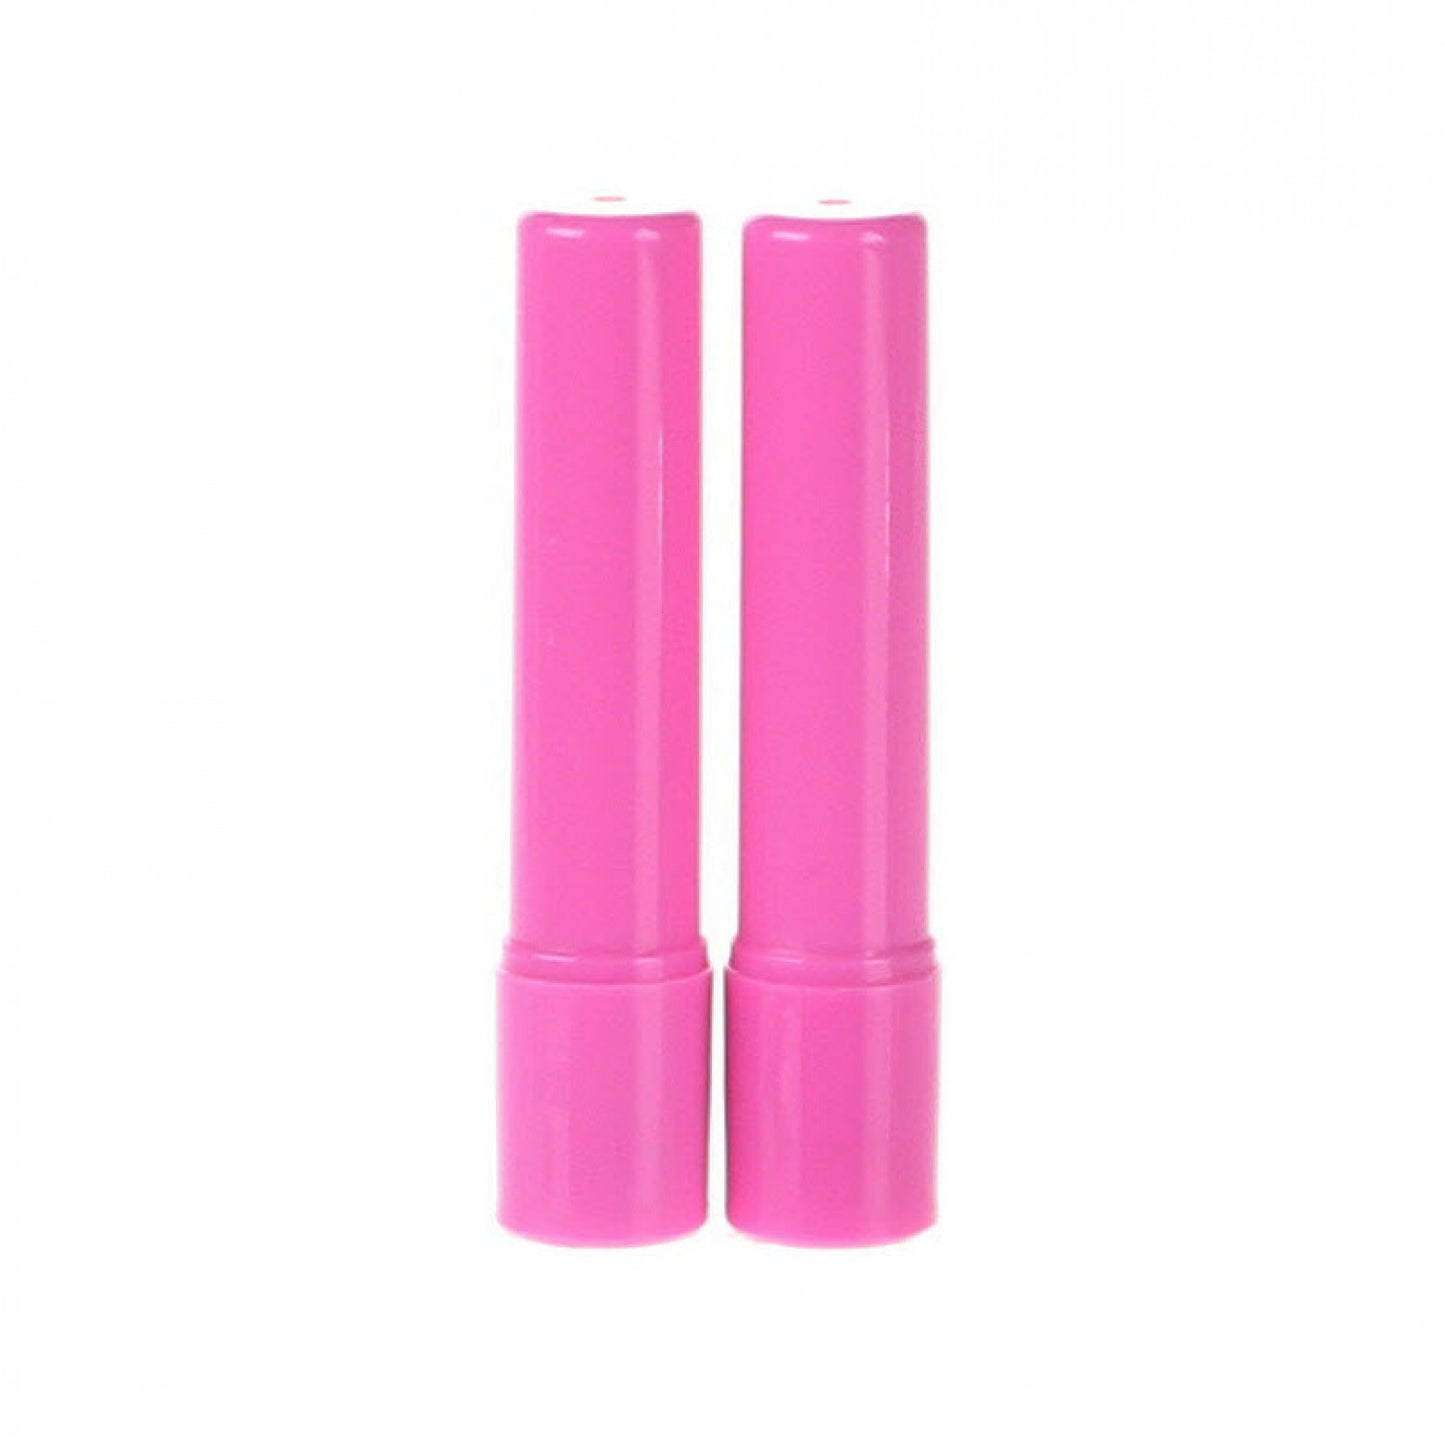 Water Soluble Glue Refill Pink : Sewline